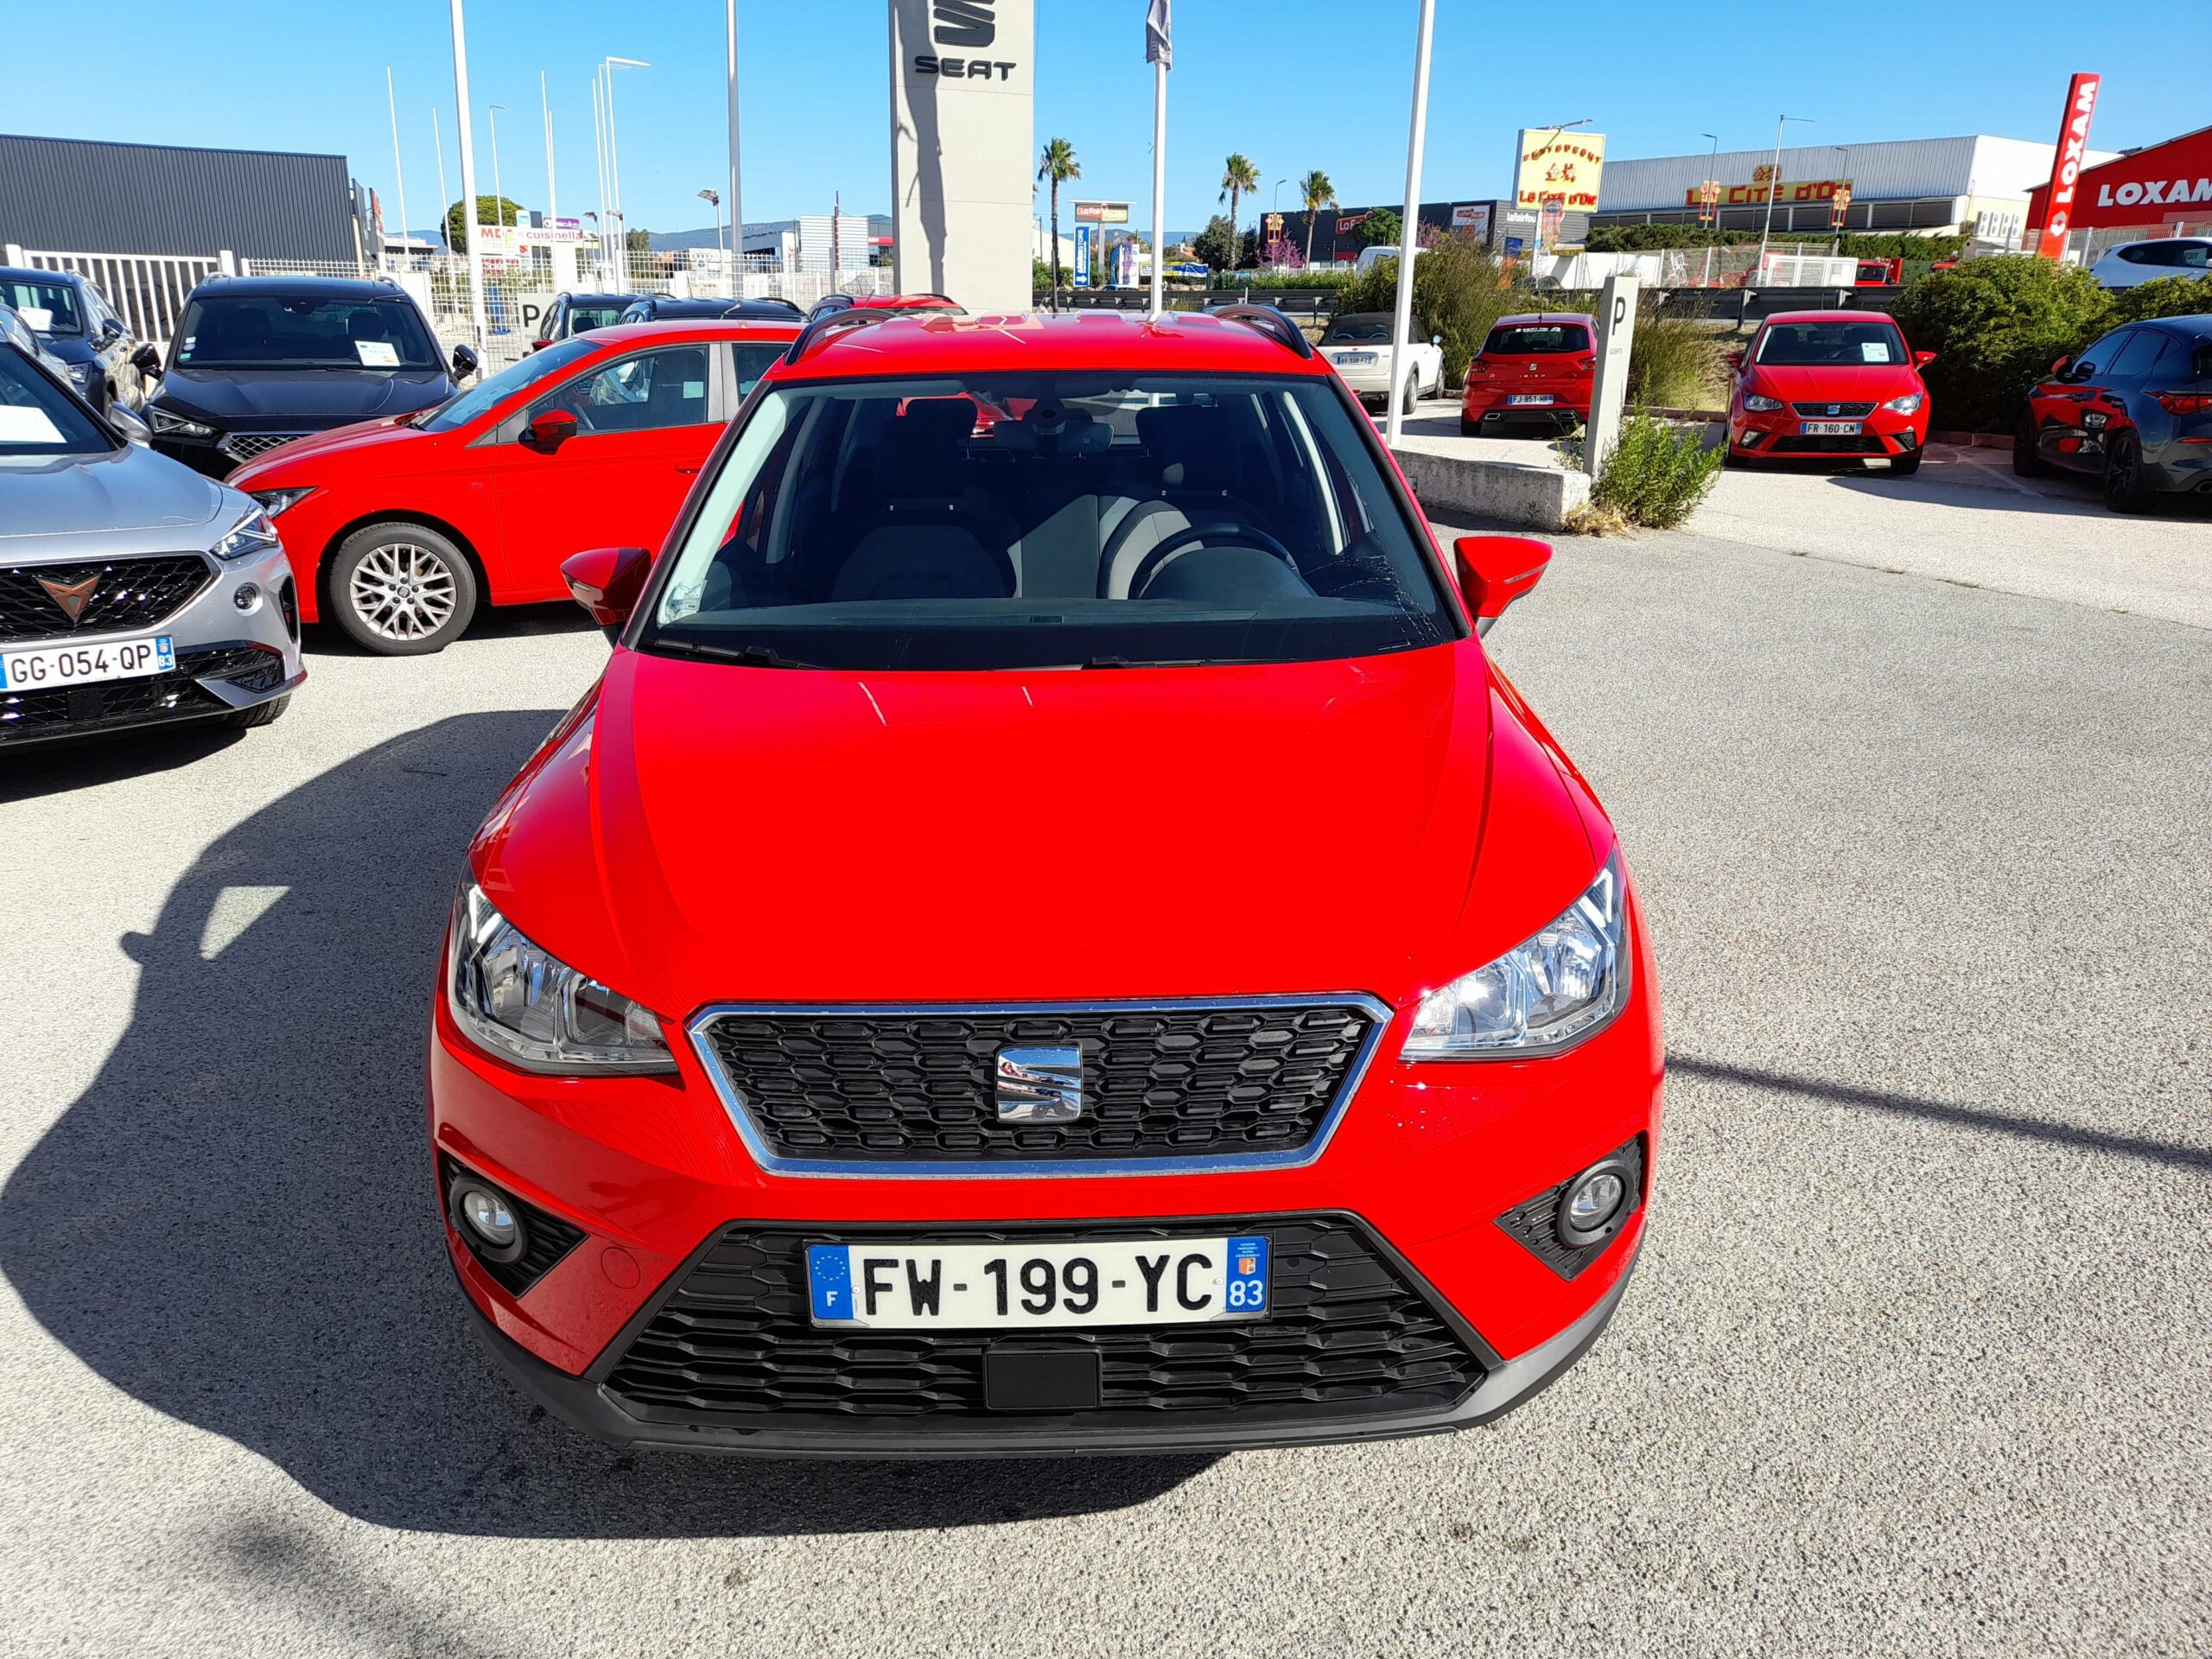 SEAT Arona 1.0 EcoTSI 95 ch Start/Stop BVM5 – Finition Style – Occasion –  5111214490 – Roure Automobiles